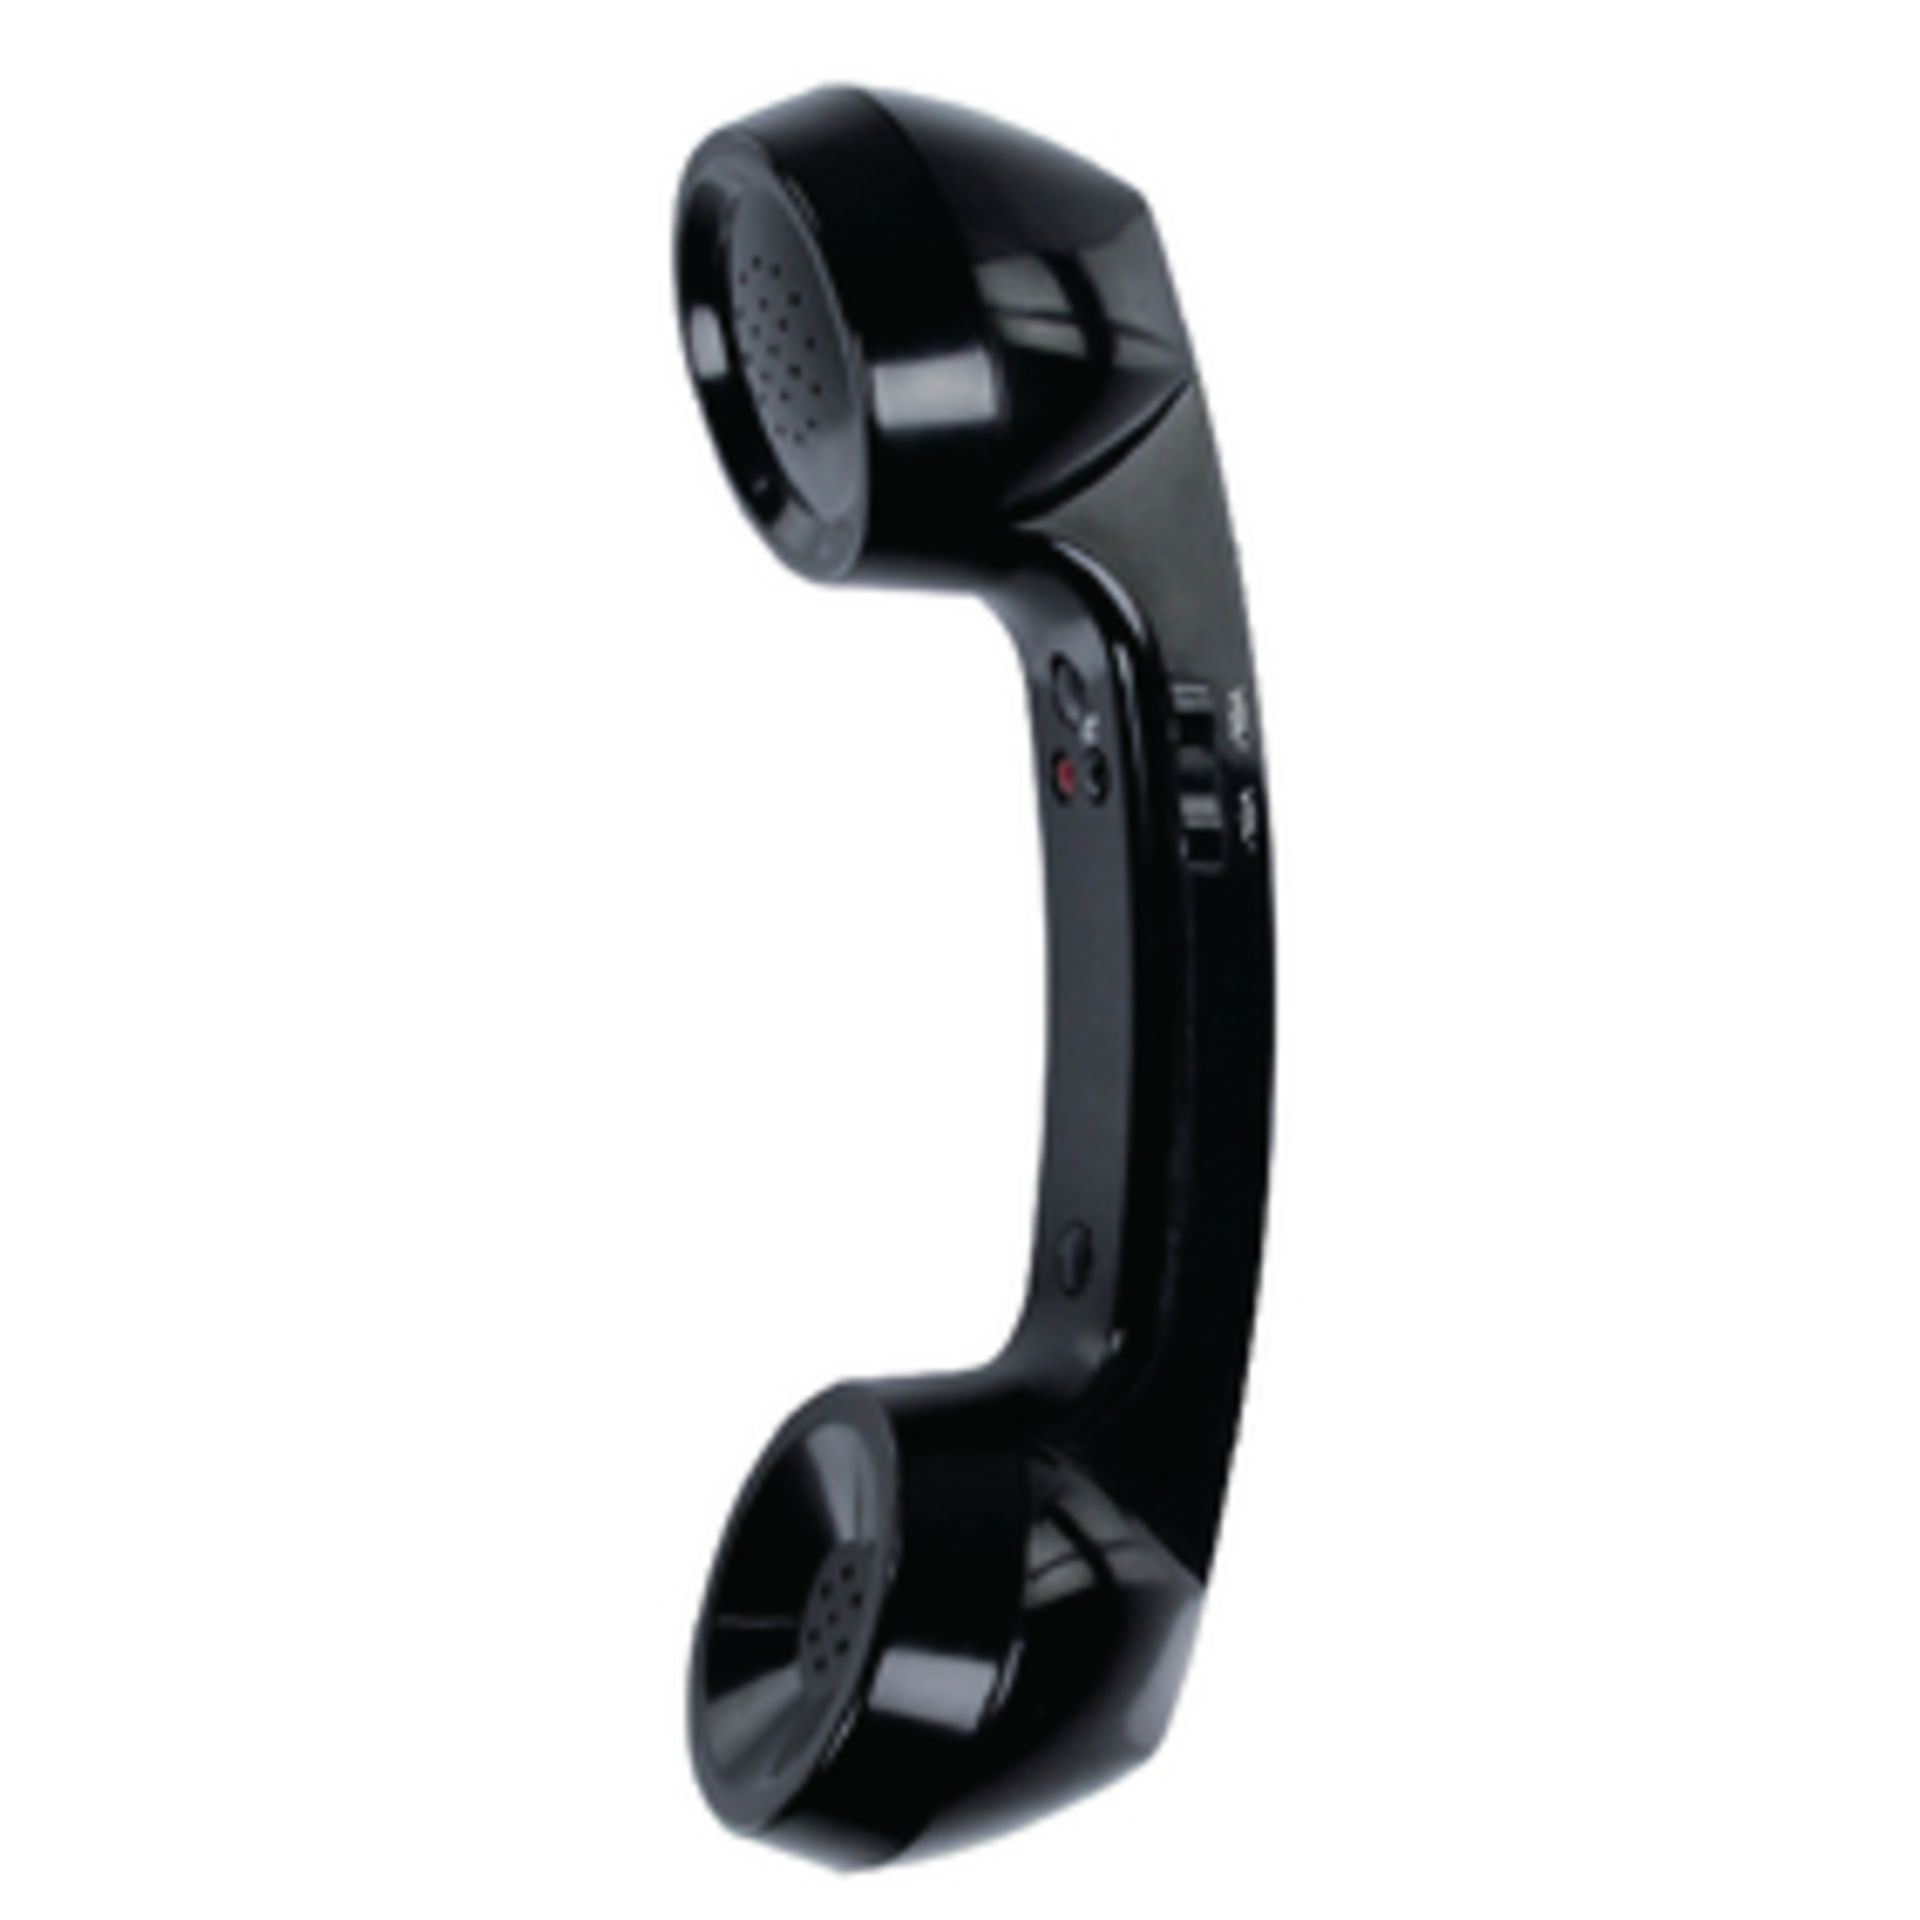 V Brand New Bluetooth Retro Telephone Handset with Charging Cable - Simply Connects To Your Phone